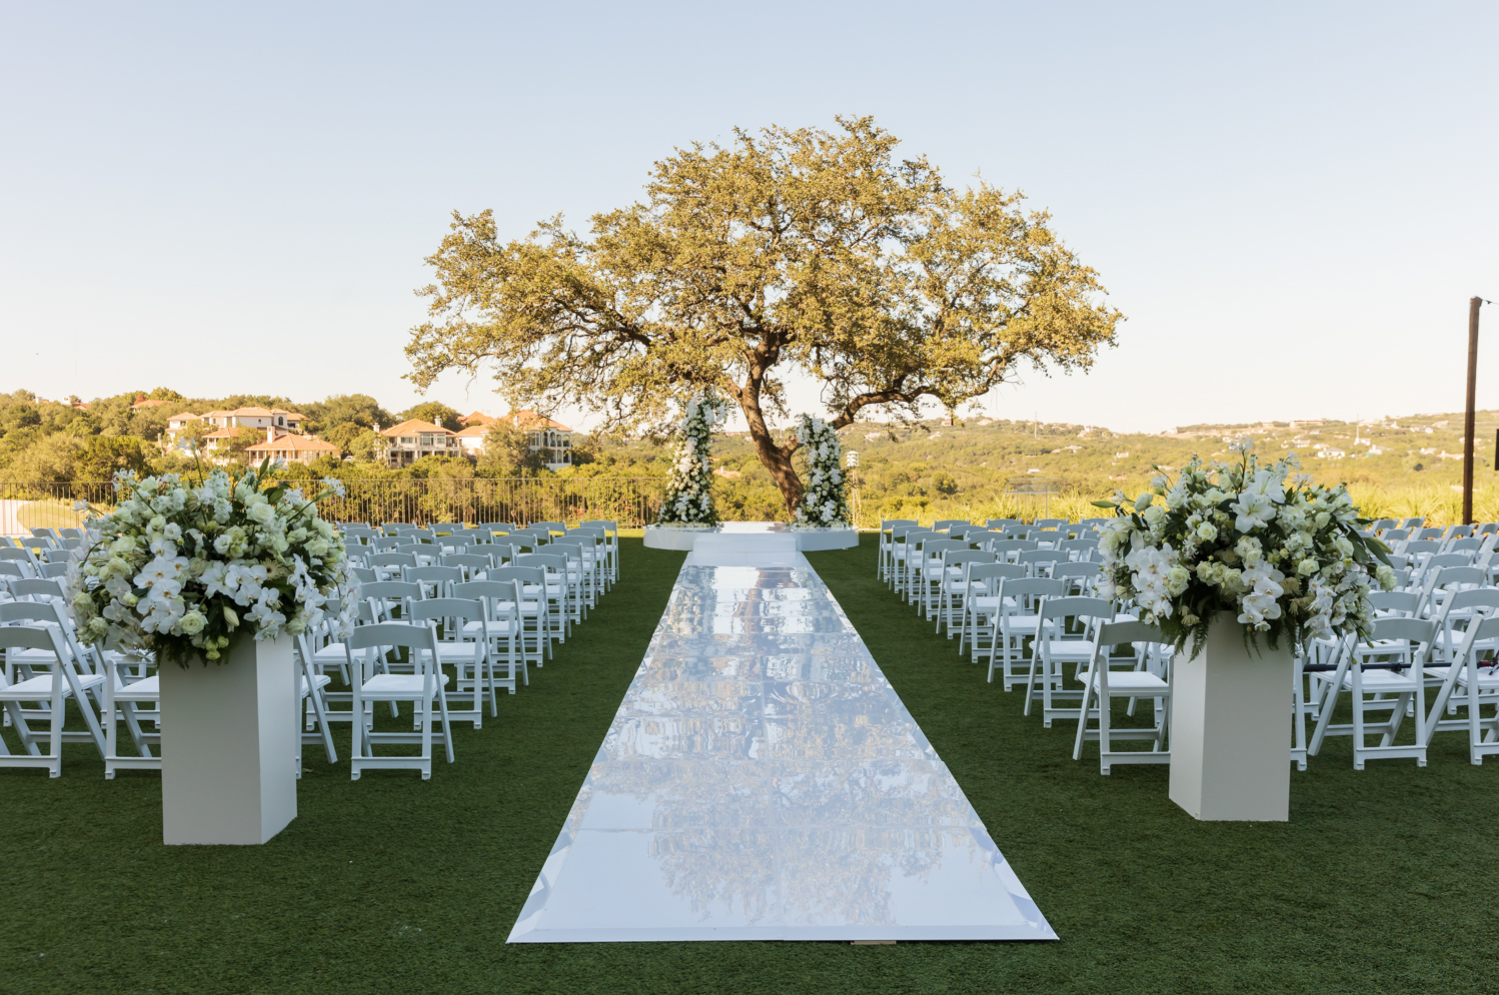 A shiny, acrylic aisle sits between rows of chairs and leads to an alter covered in white flowers.